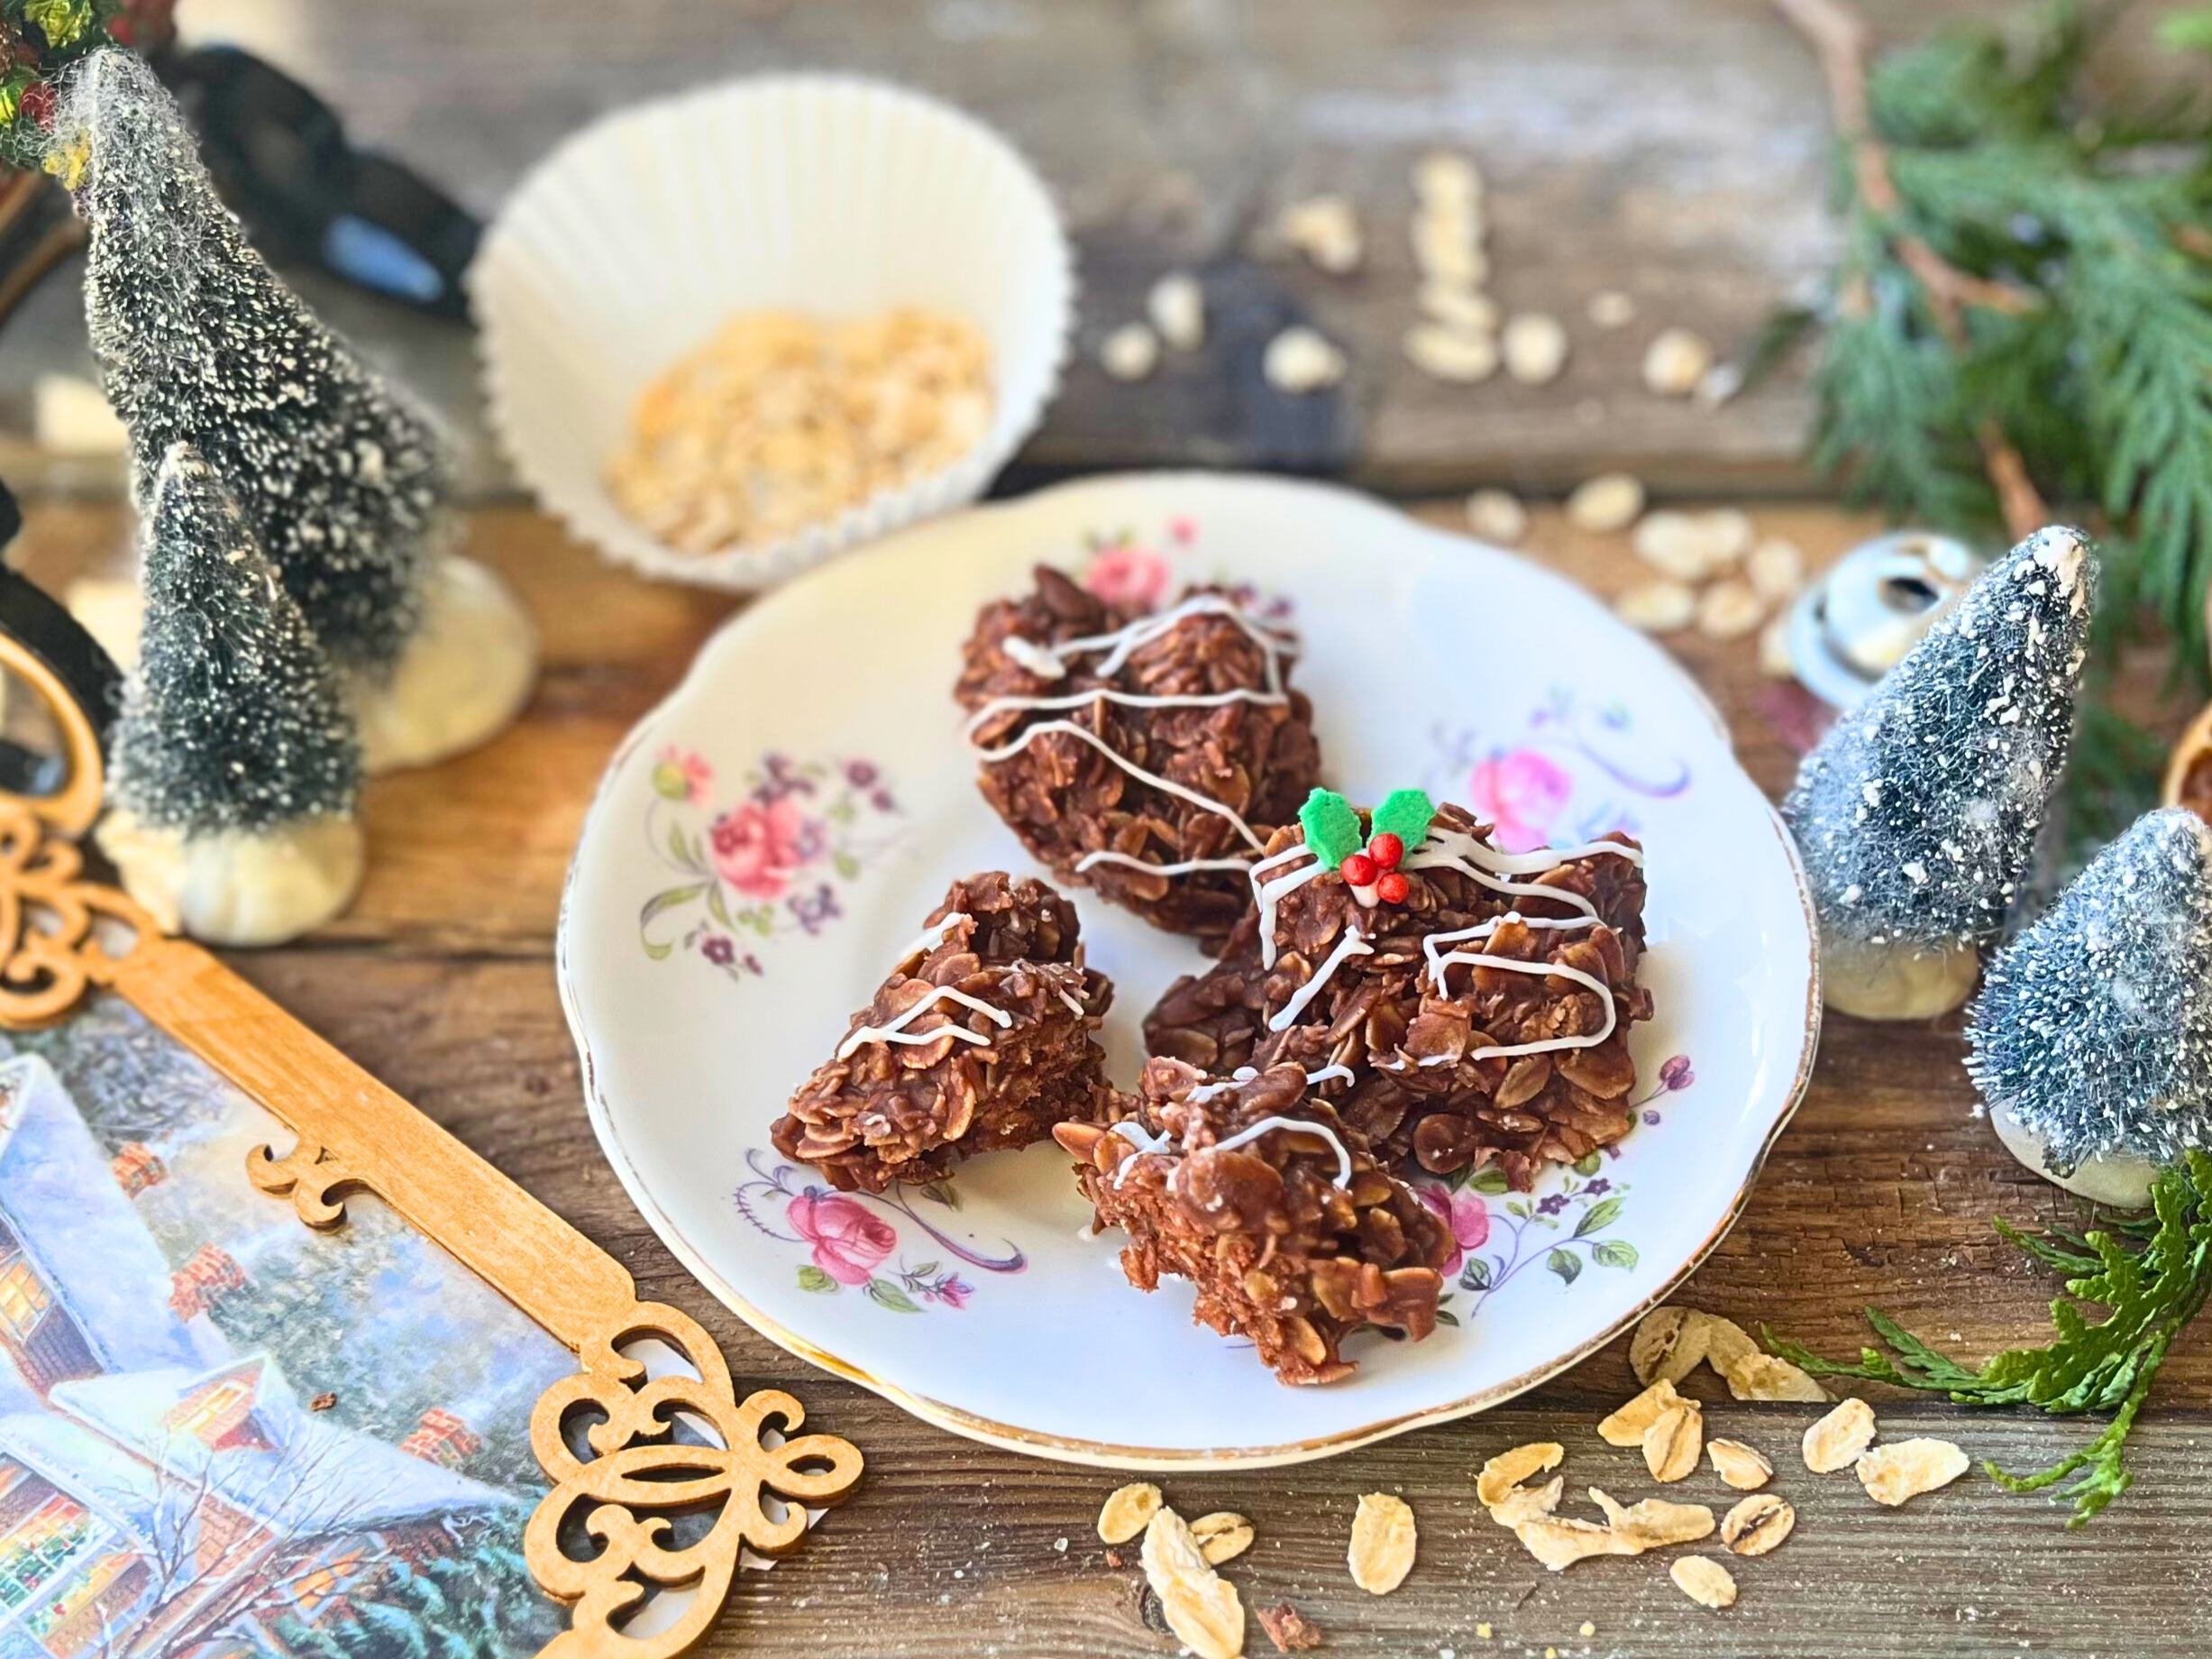 A white and pink floral plate with four chocolate haystacks on it. They are all decrated with a white icing drizzle and one has a festive holly decoration.